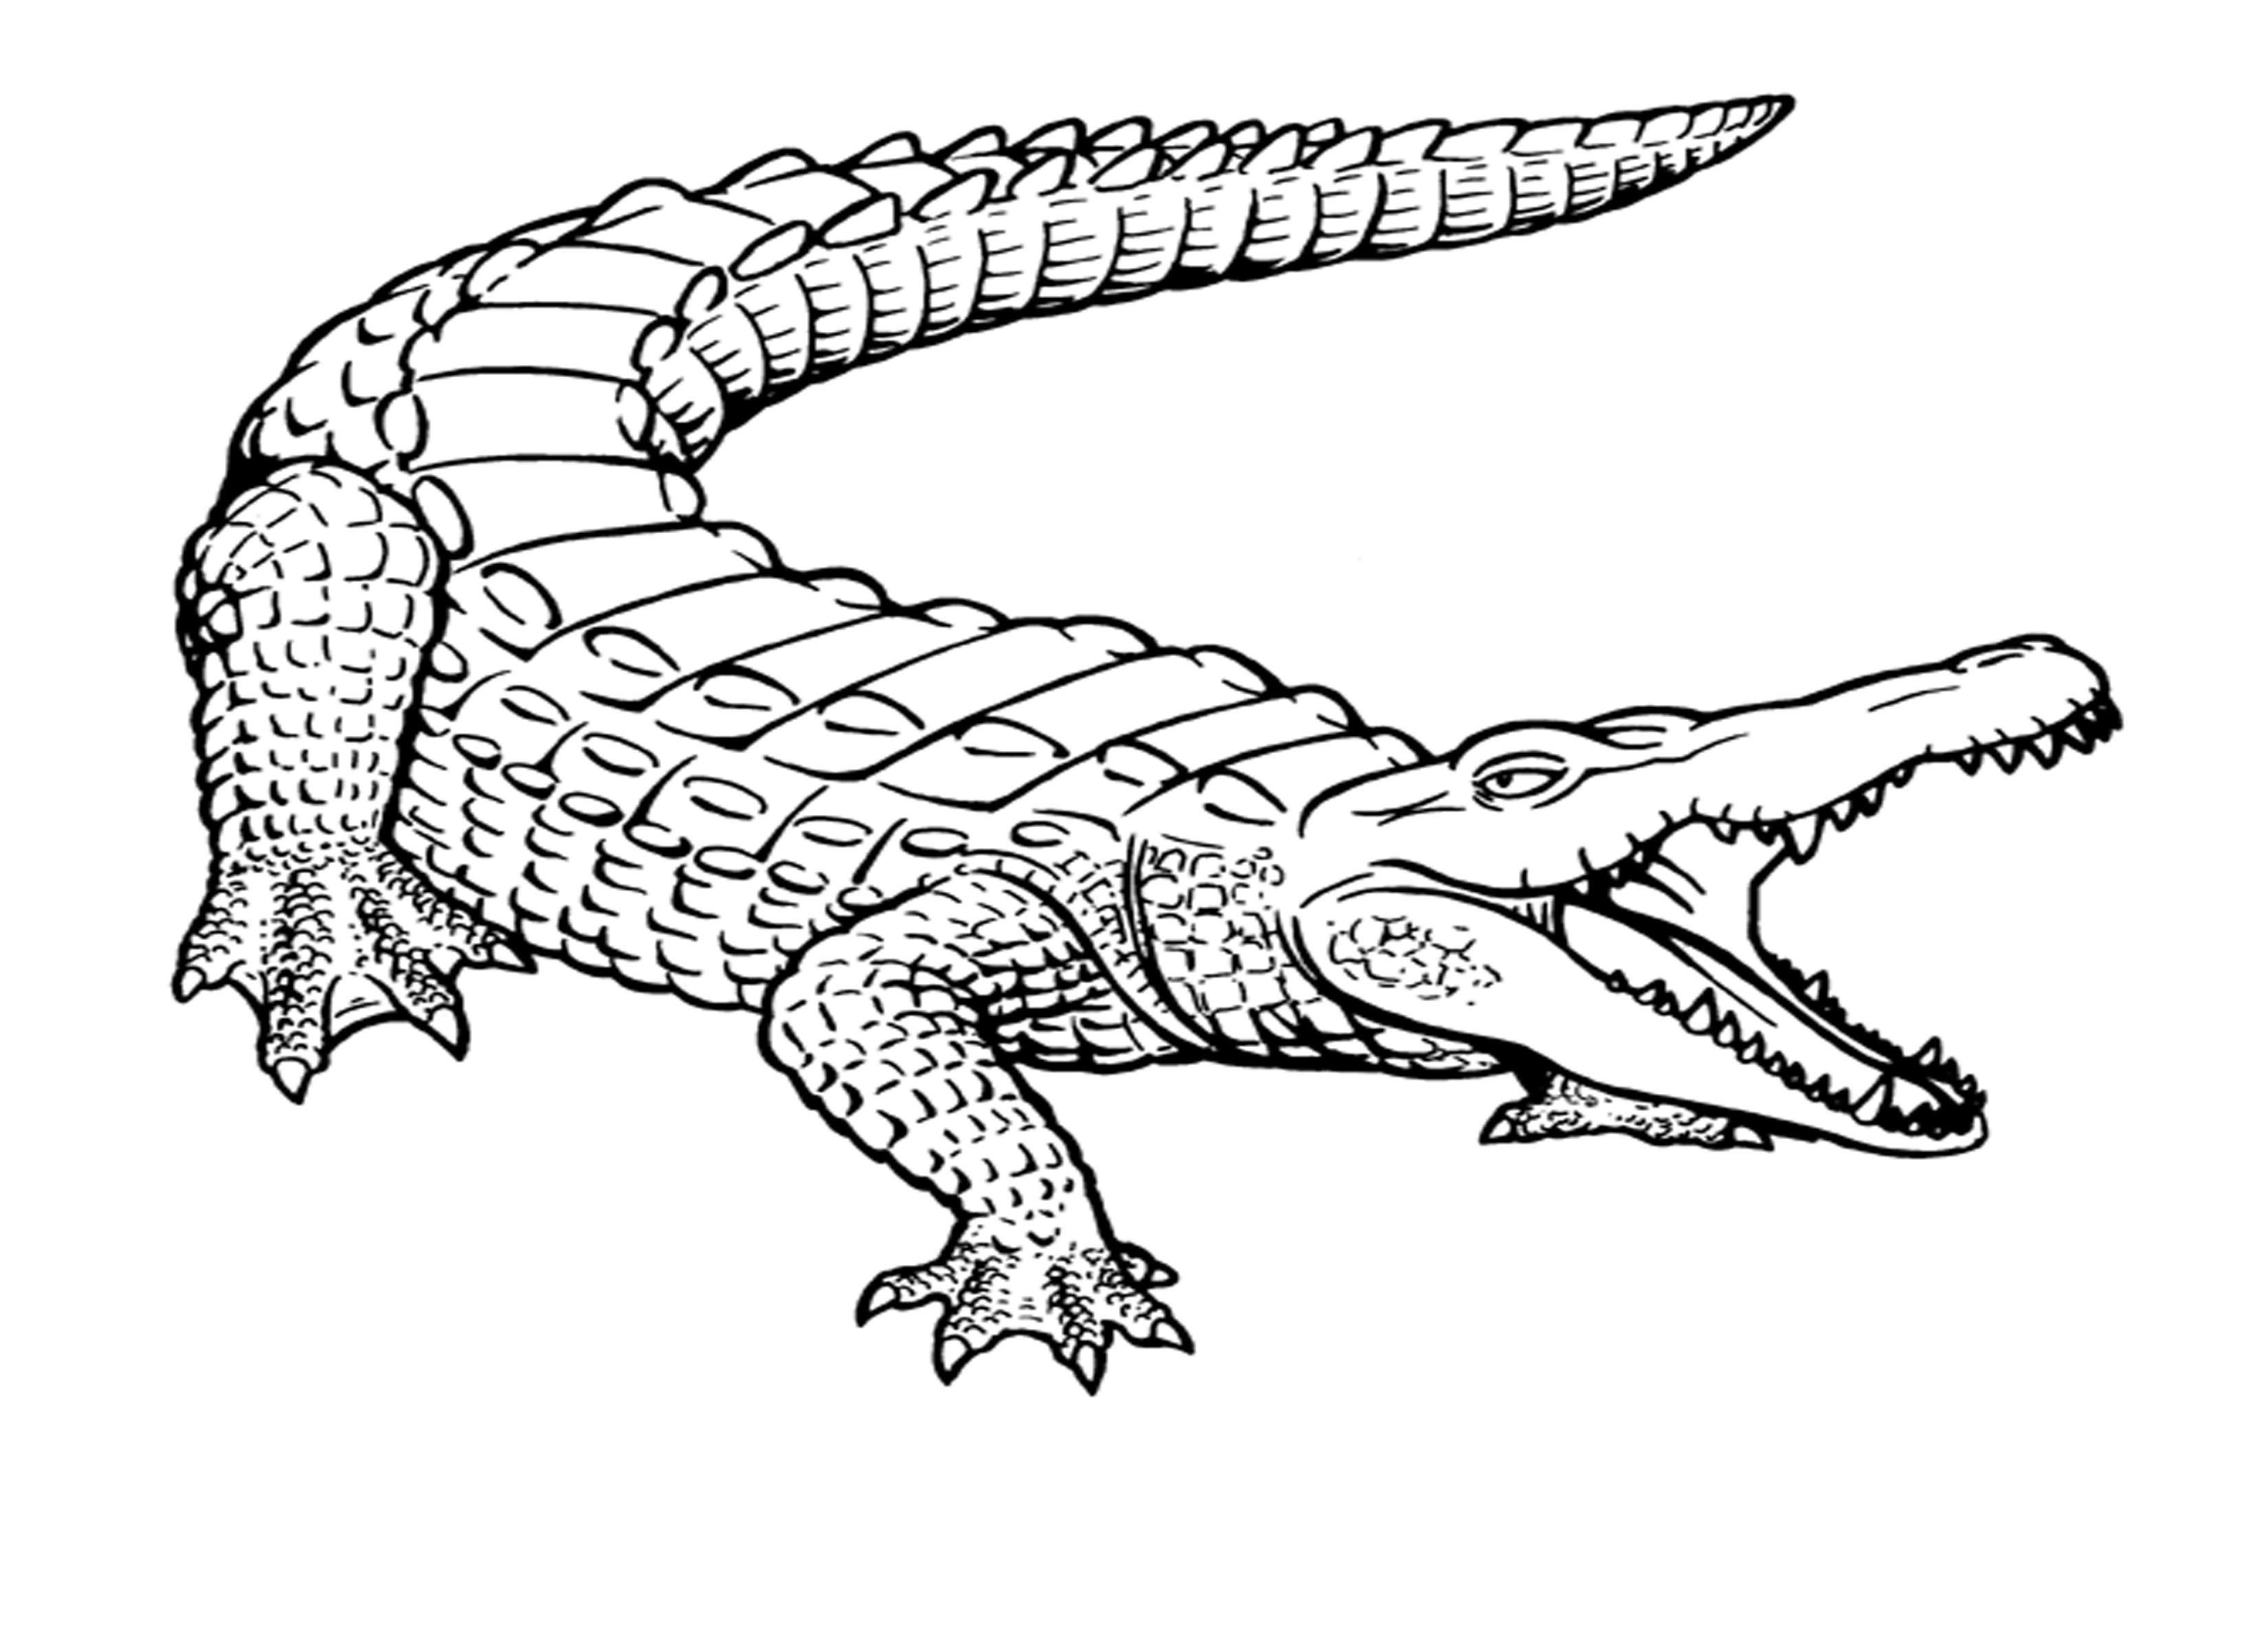 Free Printable Crocodile Coloring Pages For Kids | Ms | Coloring - Free Printable Pictures Of Crocodiles